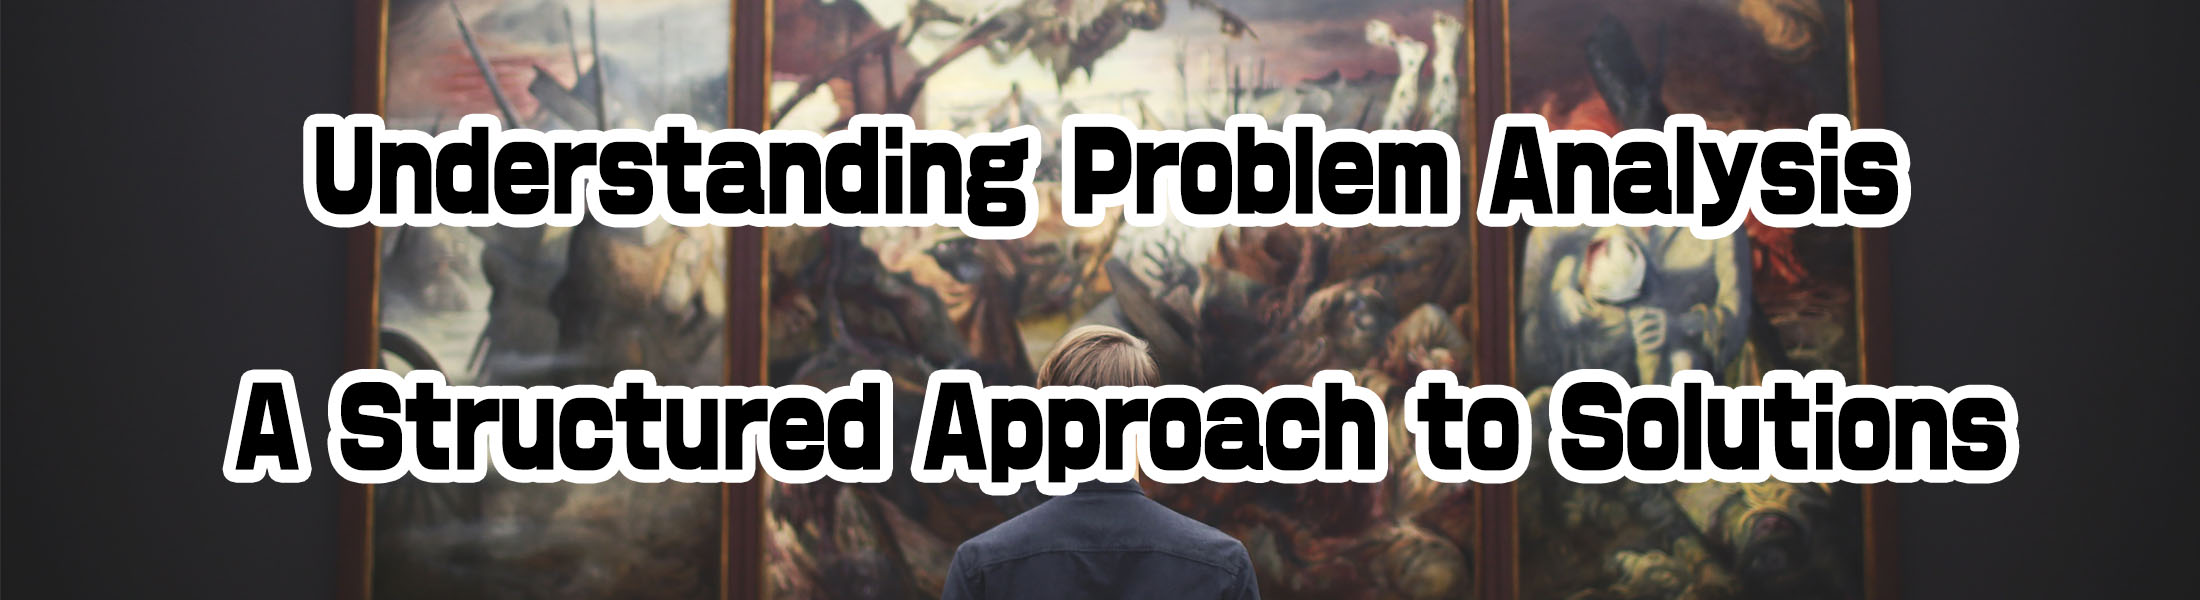 Understanding Problem Analysis: A Structured Approach to Solutions